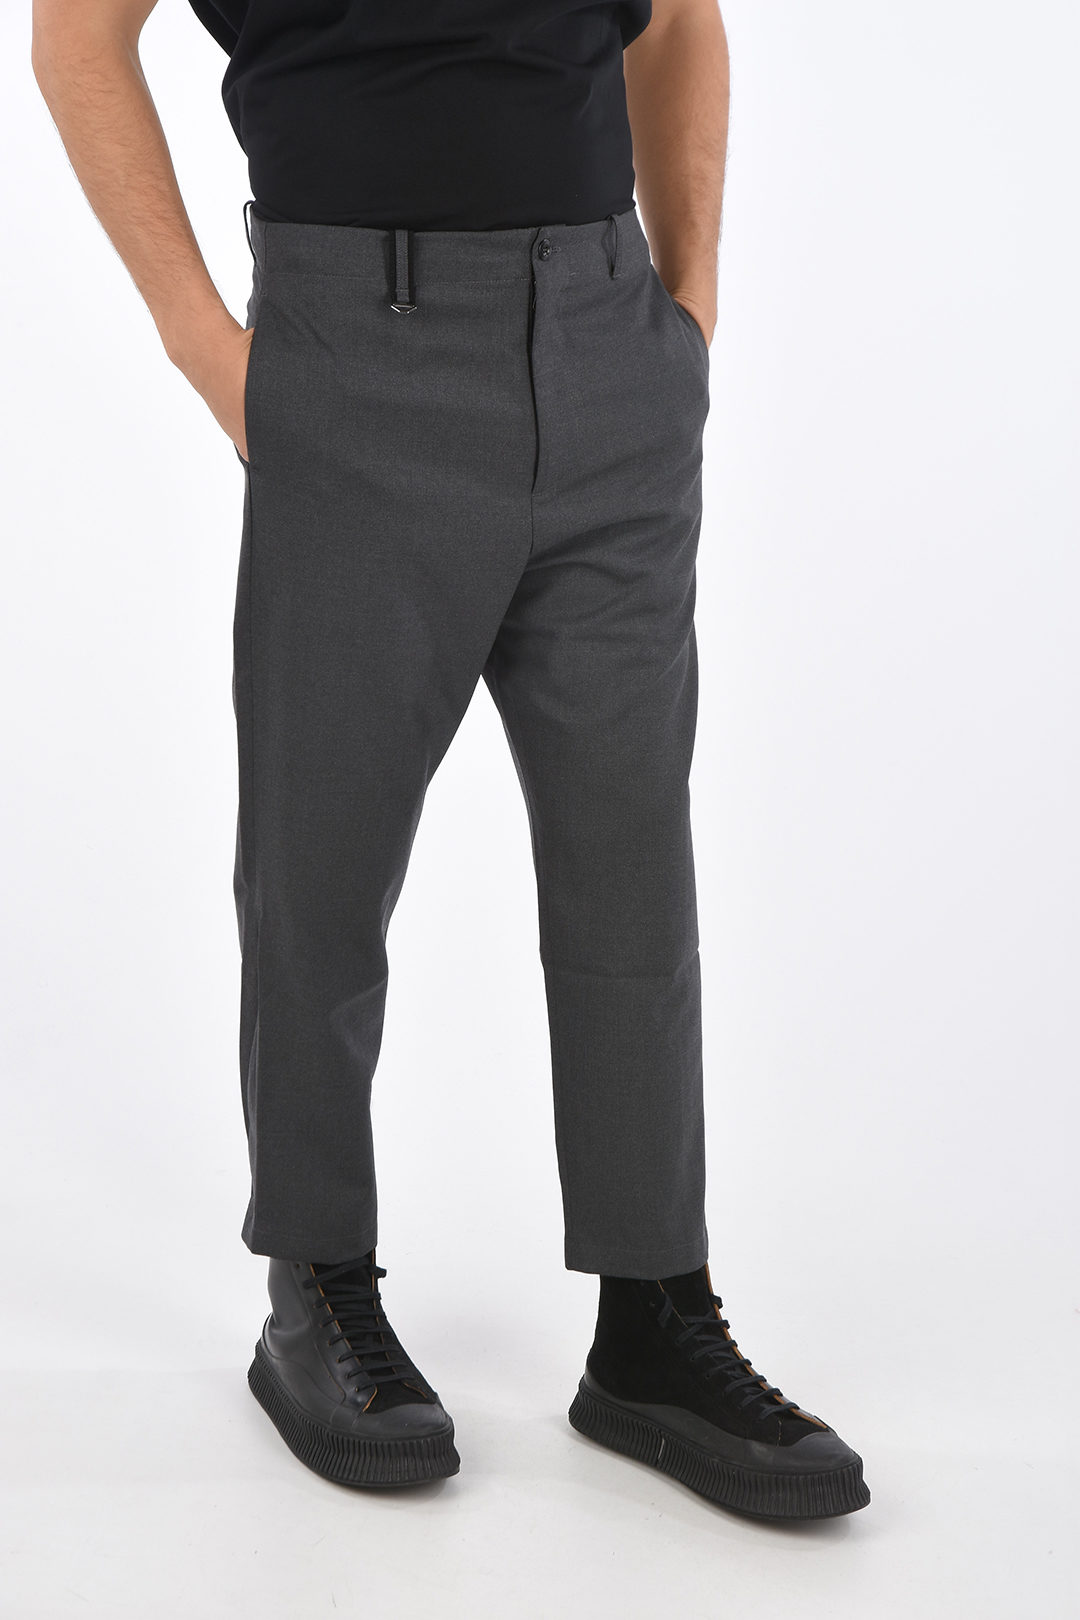 Hip Hop Harem Sweatpants With Drop Crotch For Men Tapered Track Harem  Trousers For Workout And Jogging Cotton Pants In Sizes M 5XL 201109 From  Bai02, $36.22 | DHgate.Com